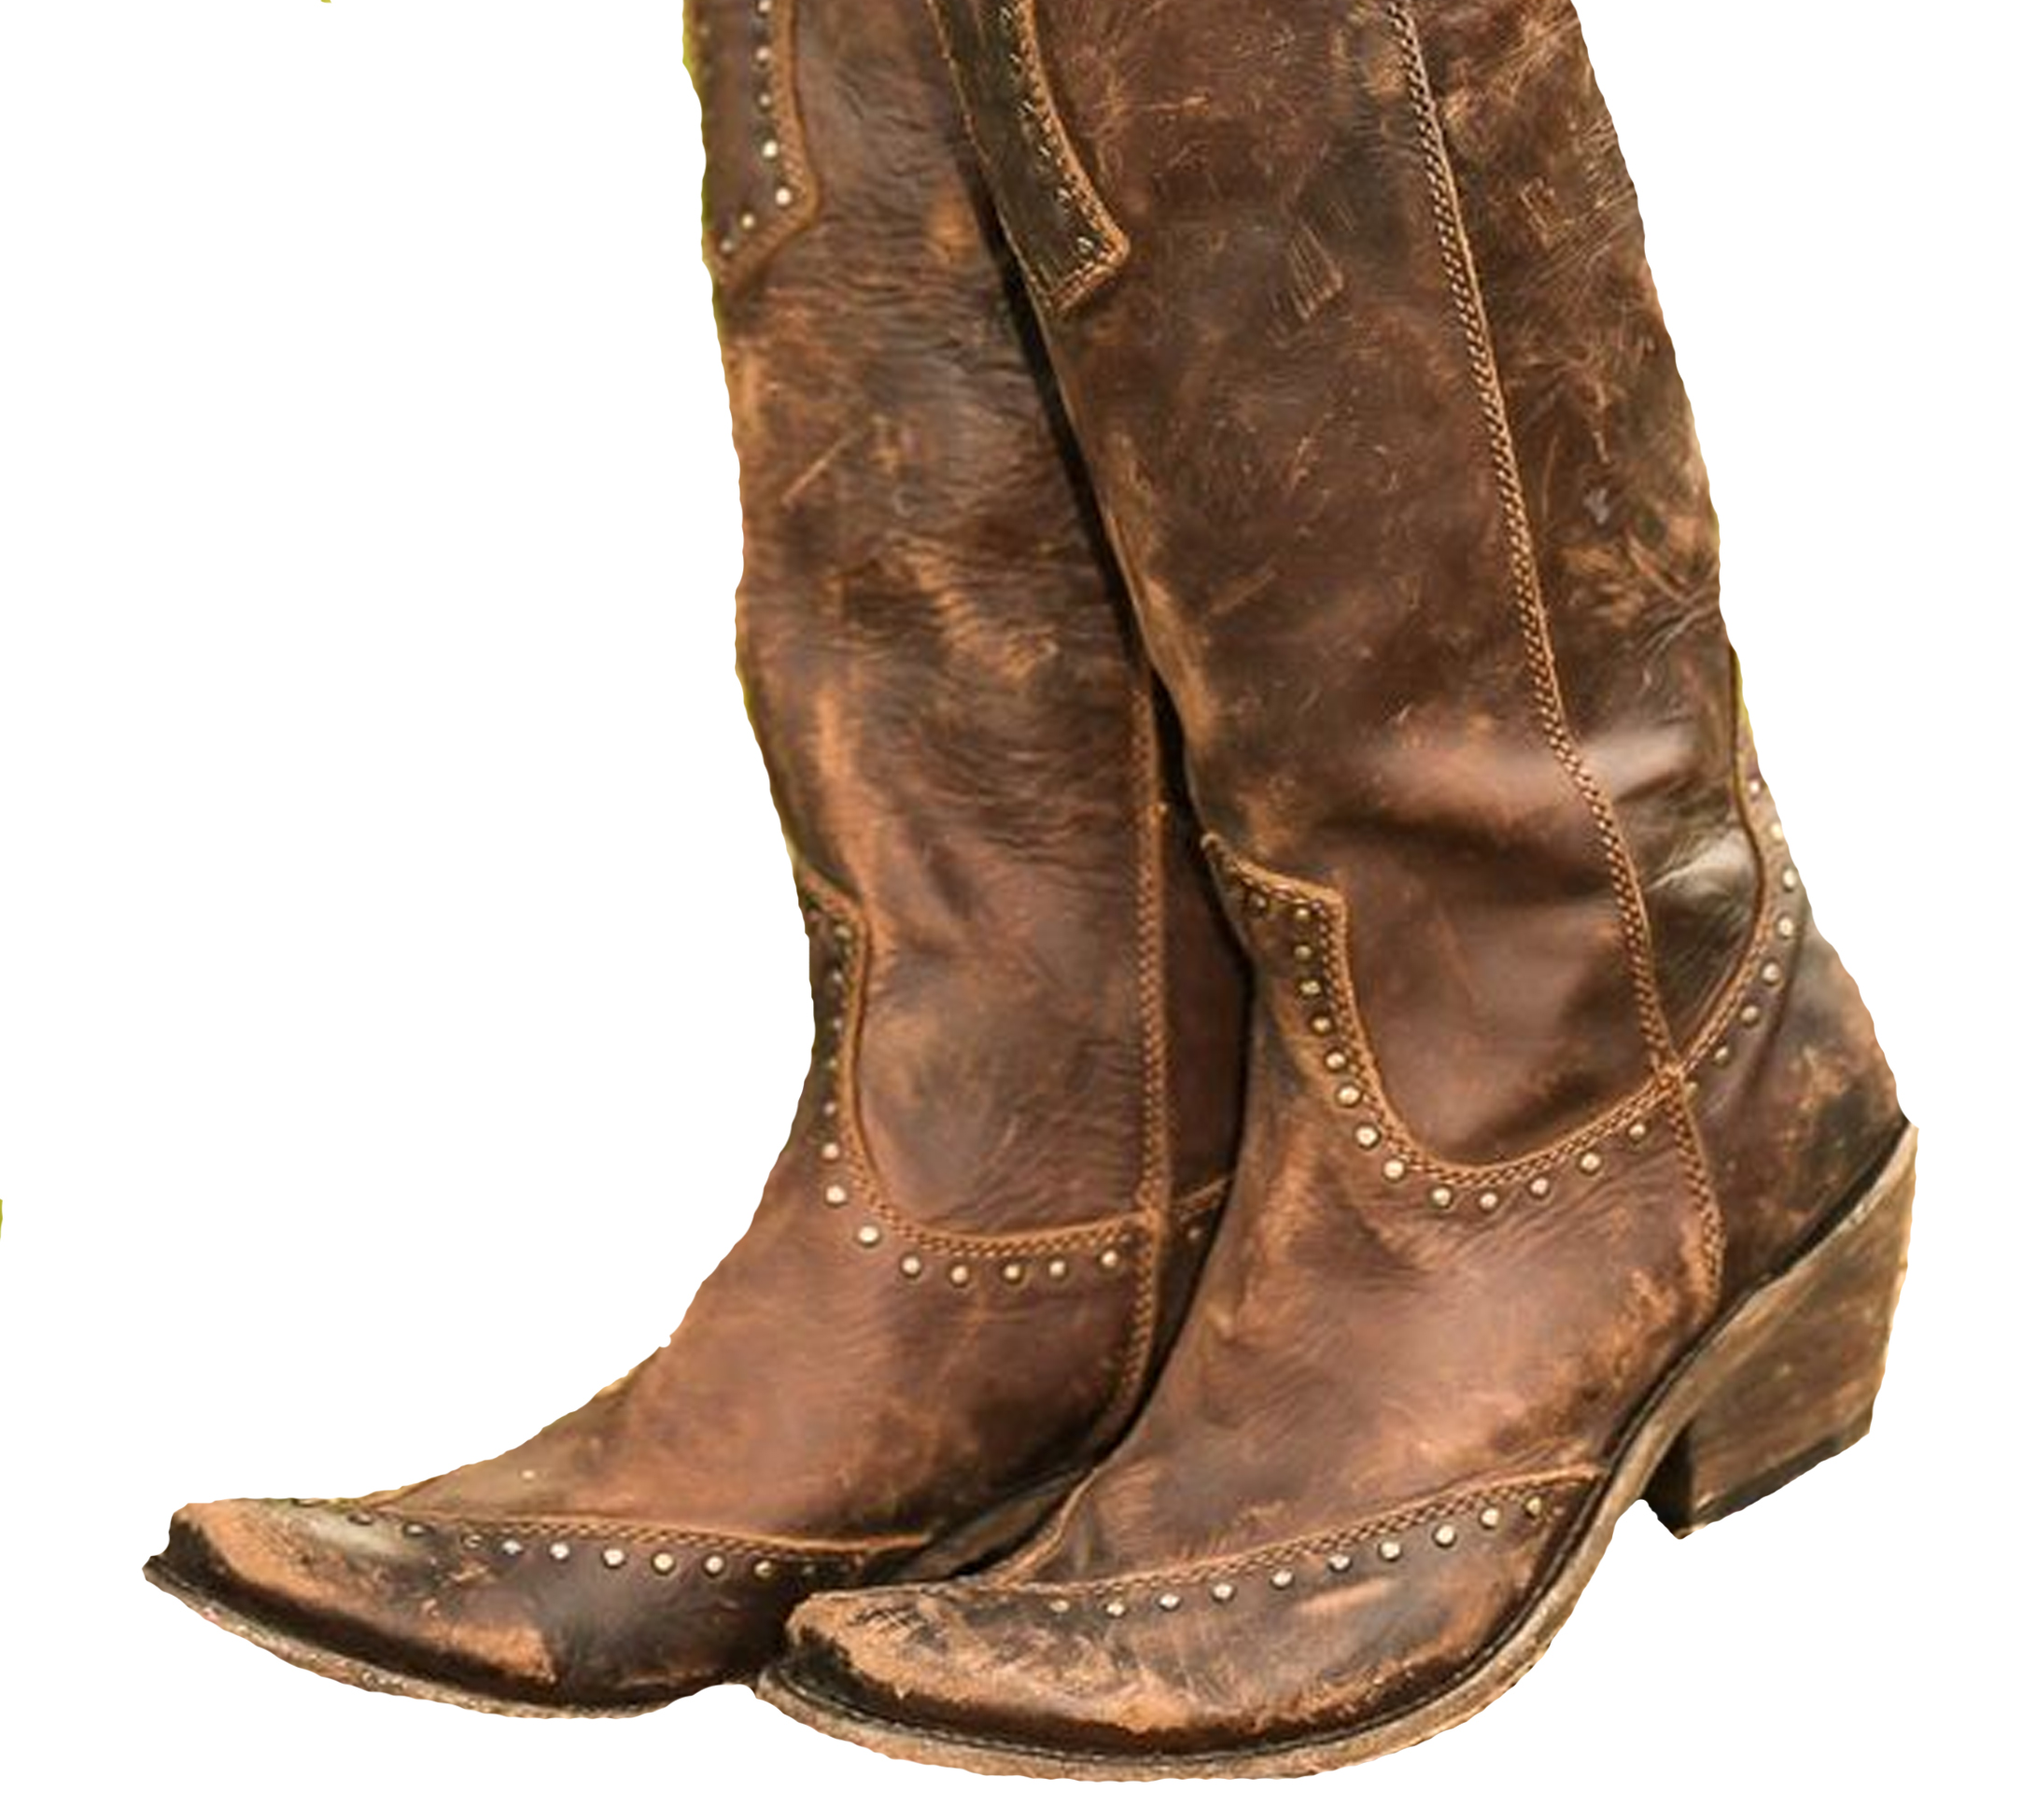 Cowboy boots- Love a little country music and line dancing.